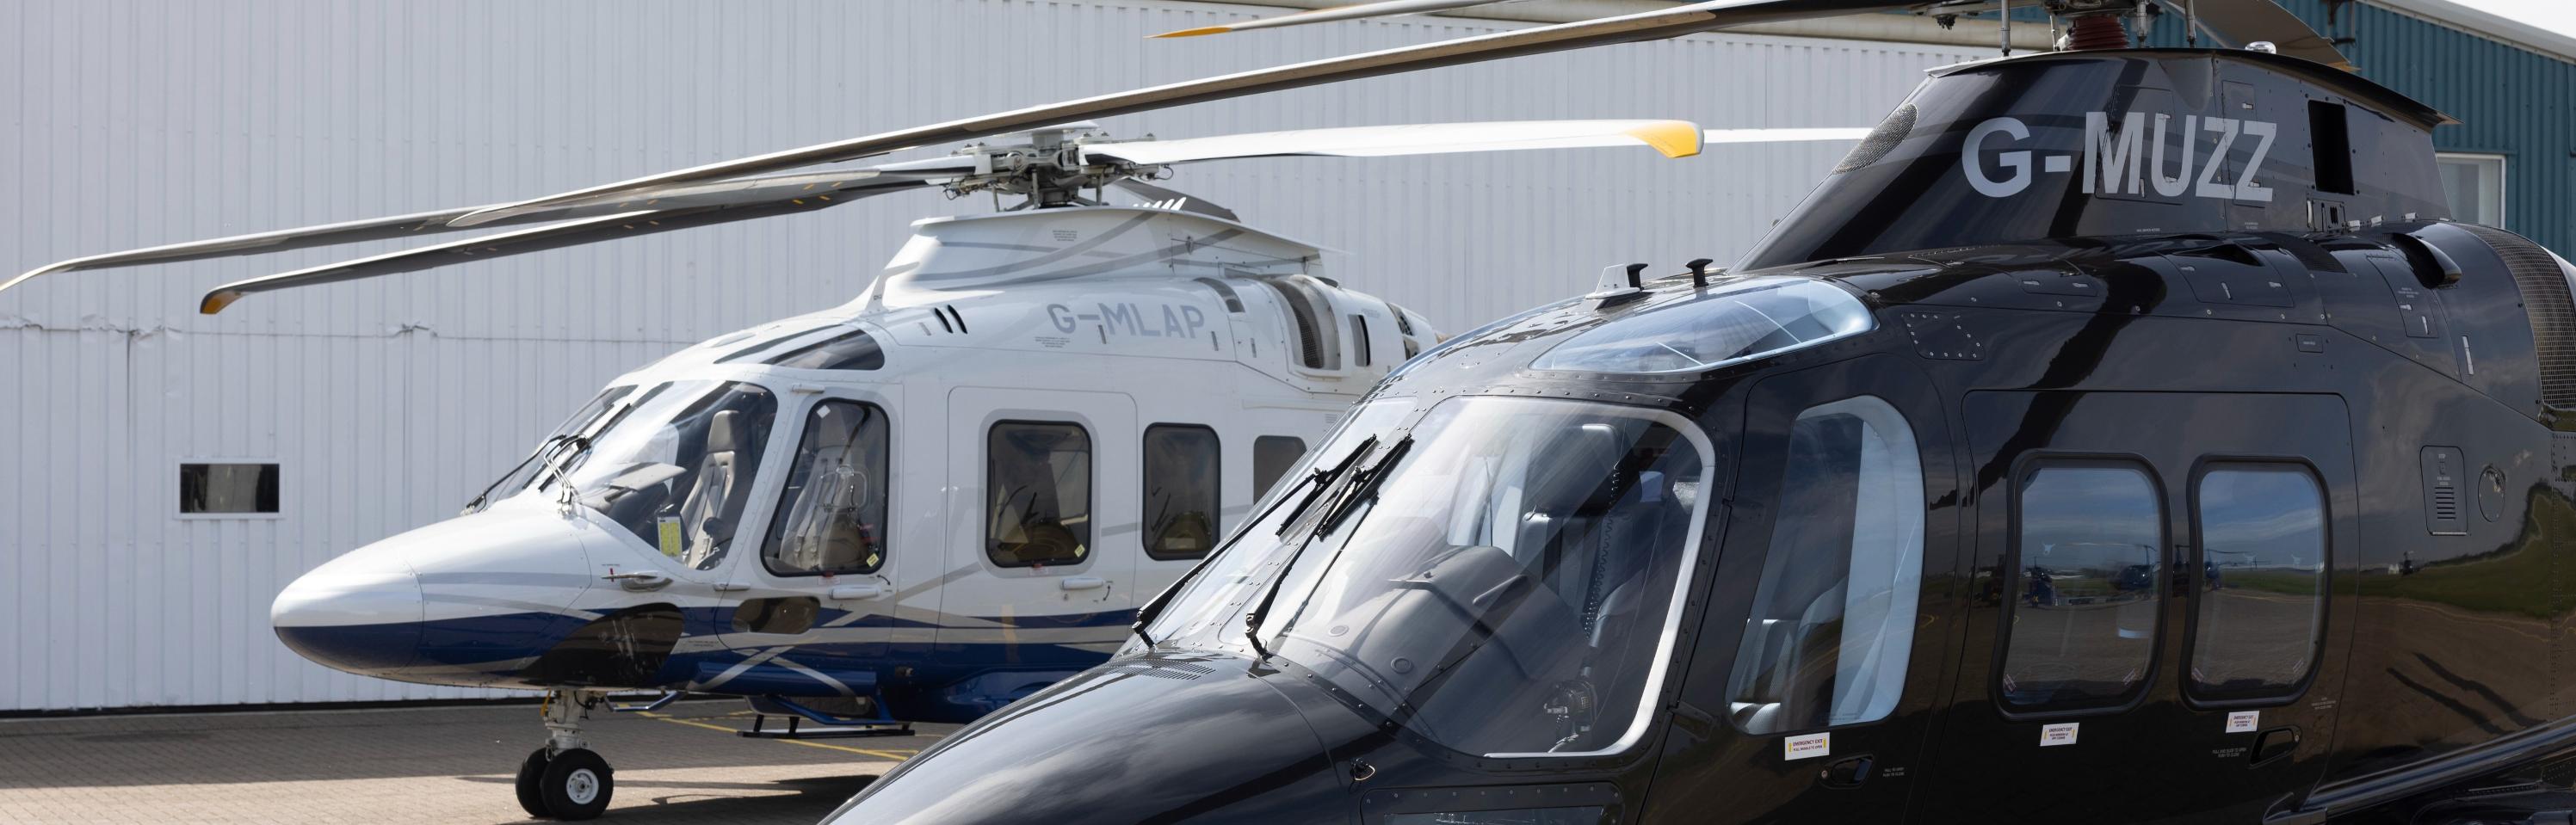 Agusta helicopter